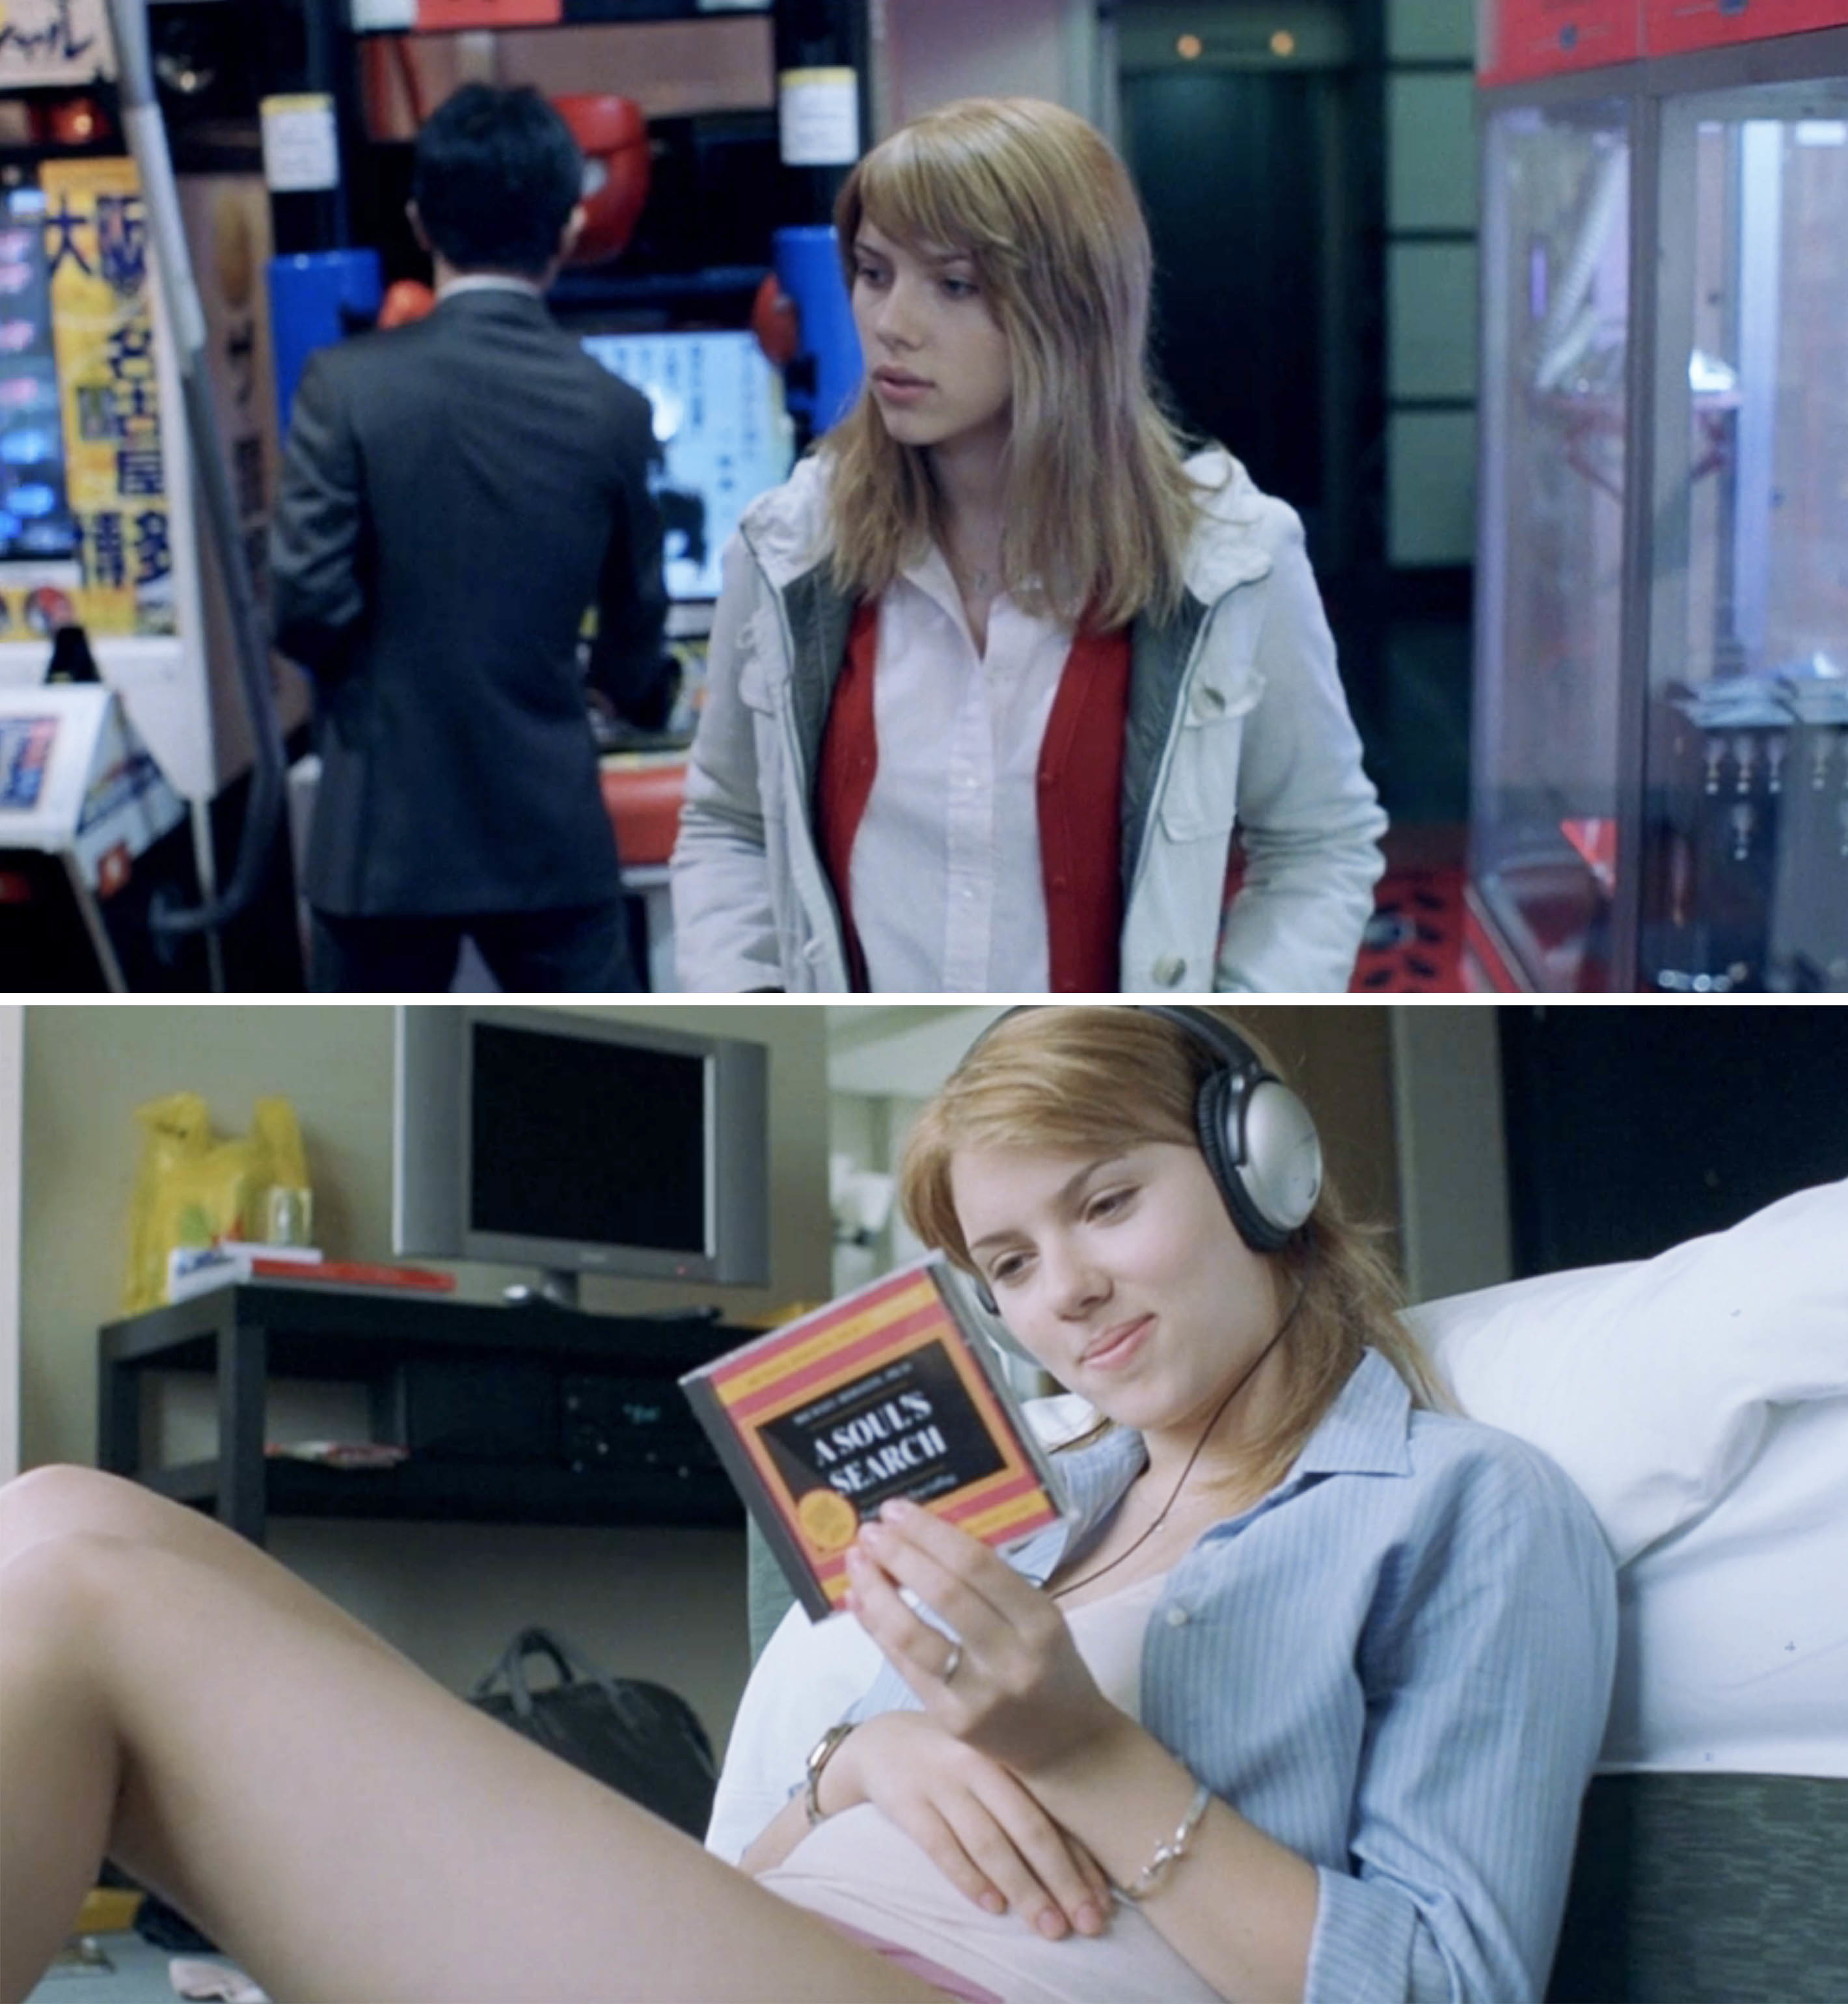 Two scenes featuring Charlotte from &quot;Lost in Translation&quot;: Charlotte in an arcade and Charlotte on a bed with a book and wearing headphones